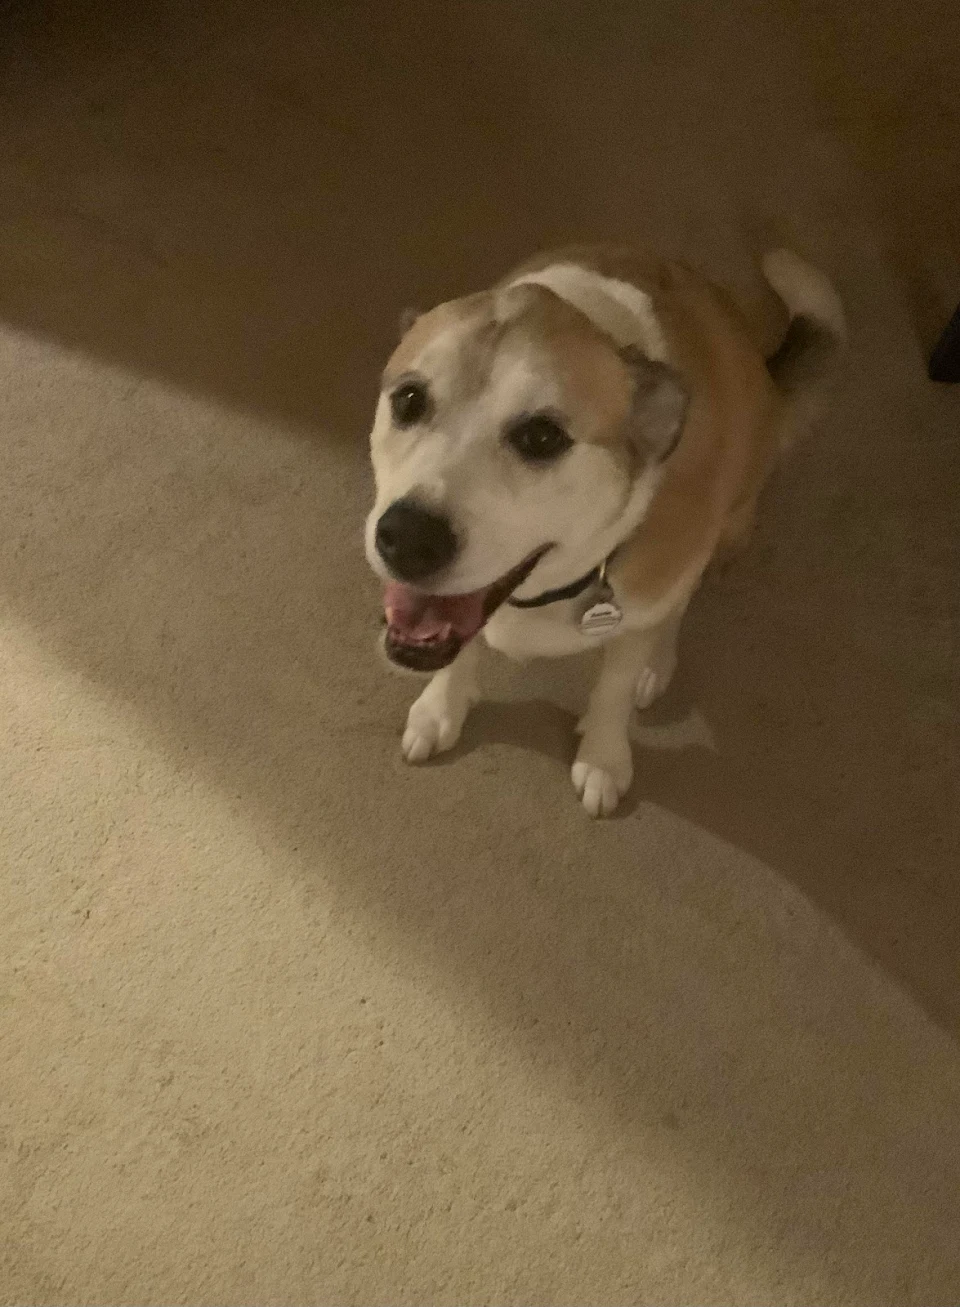 I see a lot of puppies on here. But how about an 11 year old grown female dog? Her name is Annie and she has been apart for my family since we found her as a stray those many years ago.